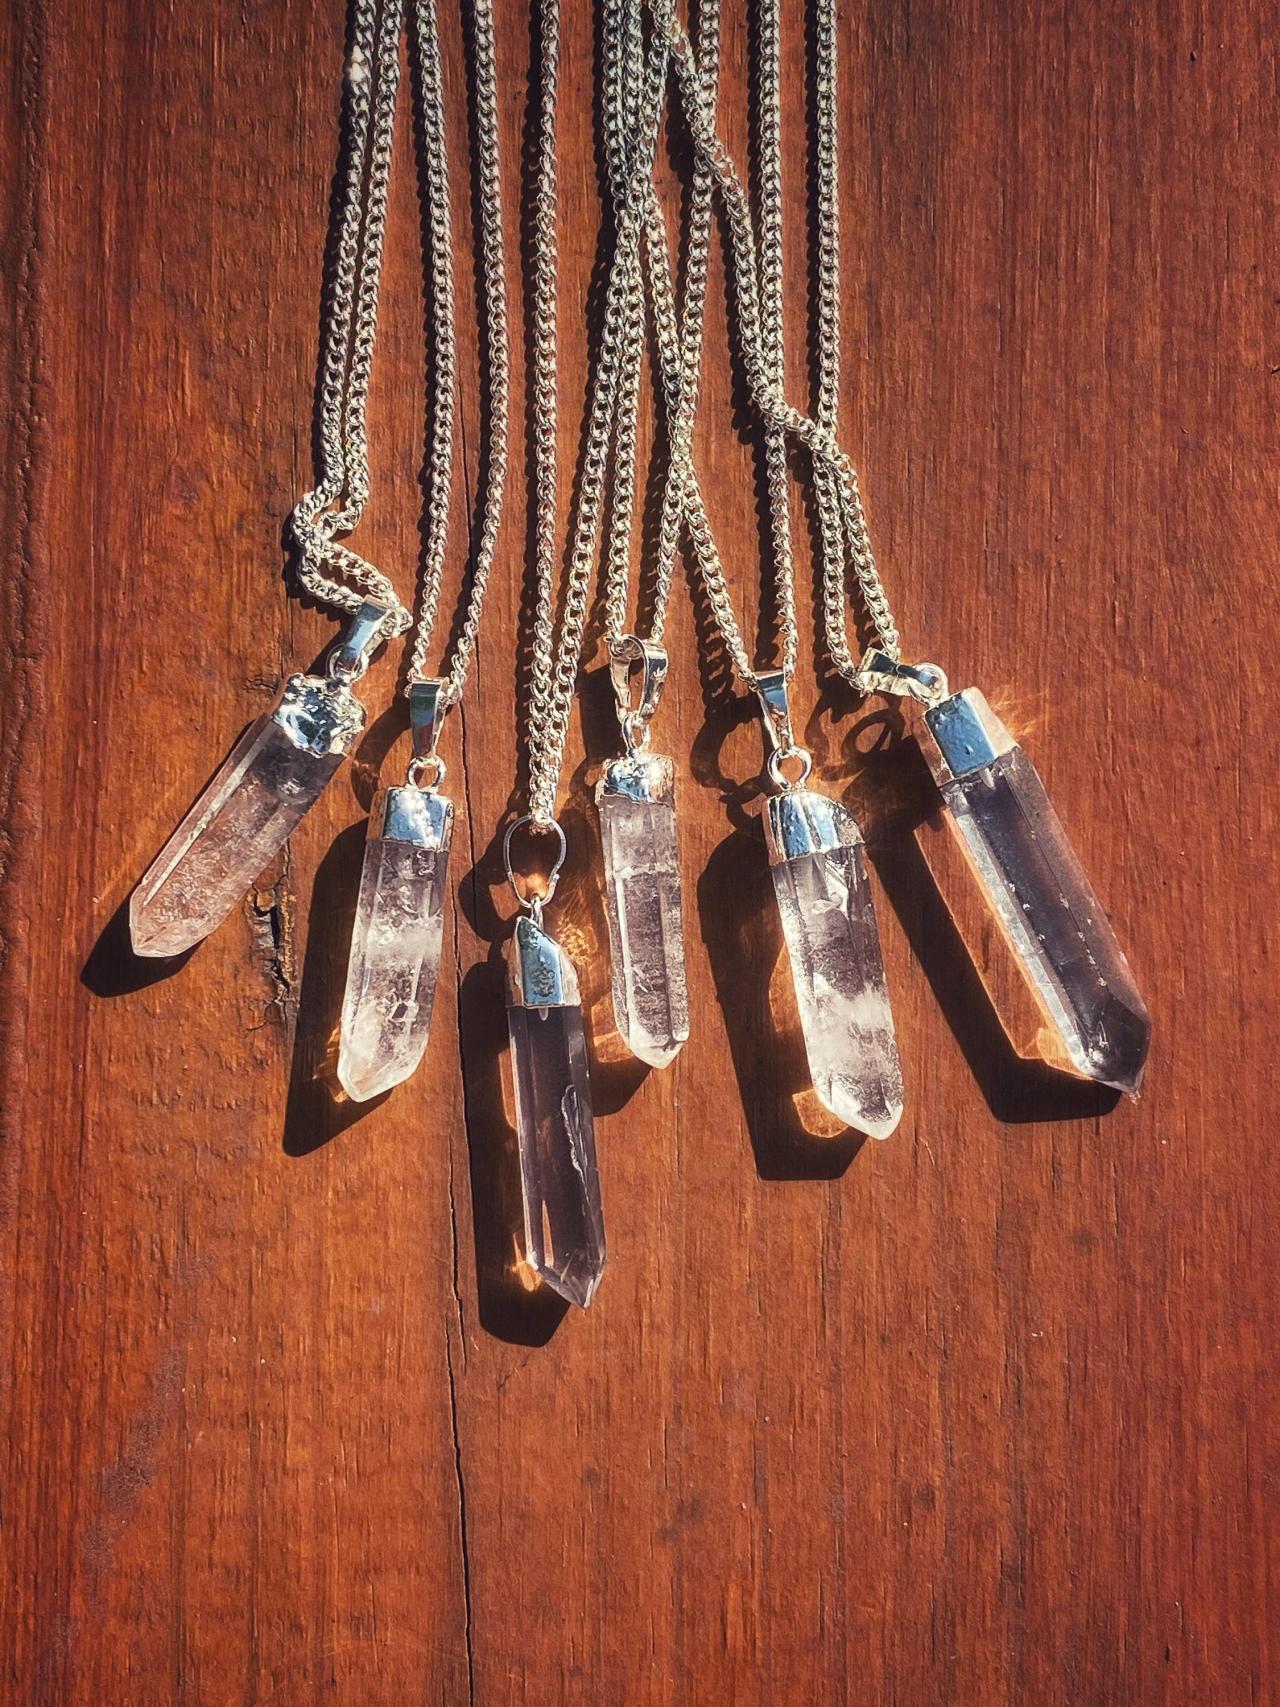 Silver Clear Quartz Point Necklace - Crystal Quartz Point Necklace - Polished Clear Quartz - Quartz Necklace